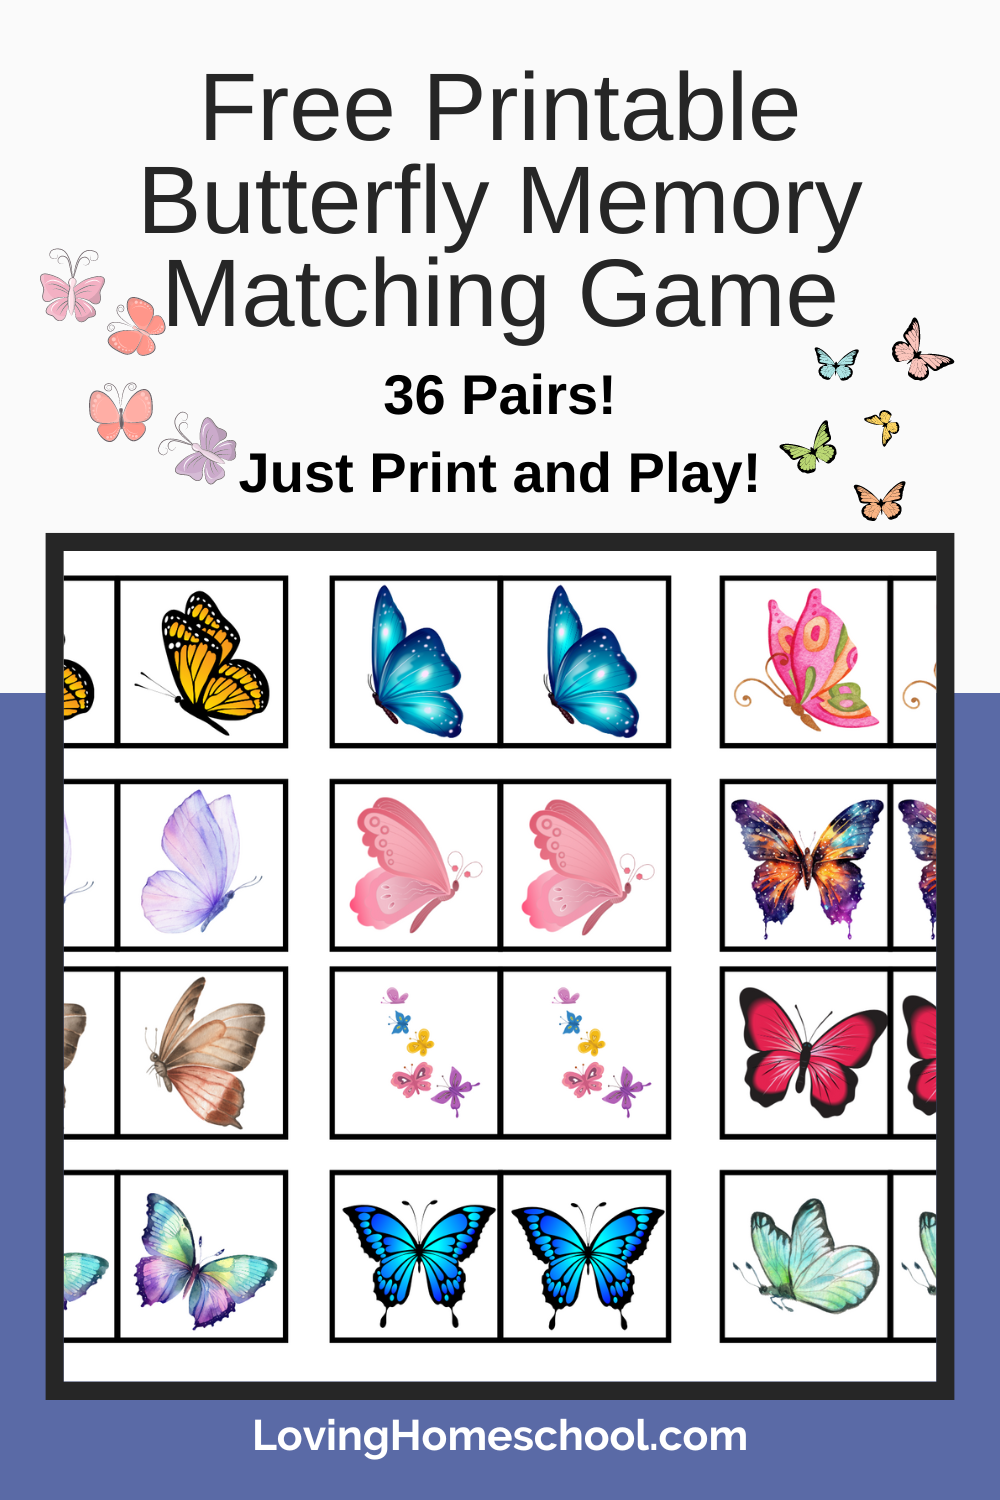 Free Printable Butterfly Memory Matching Game Pinterest Pin